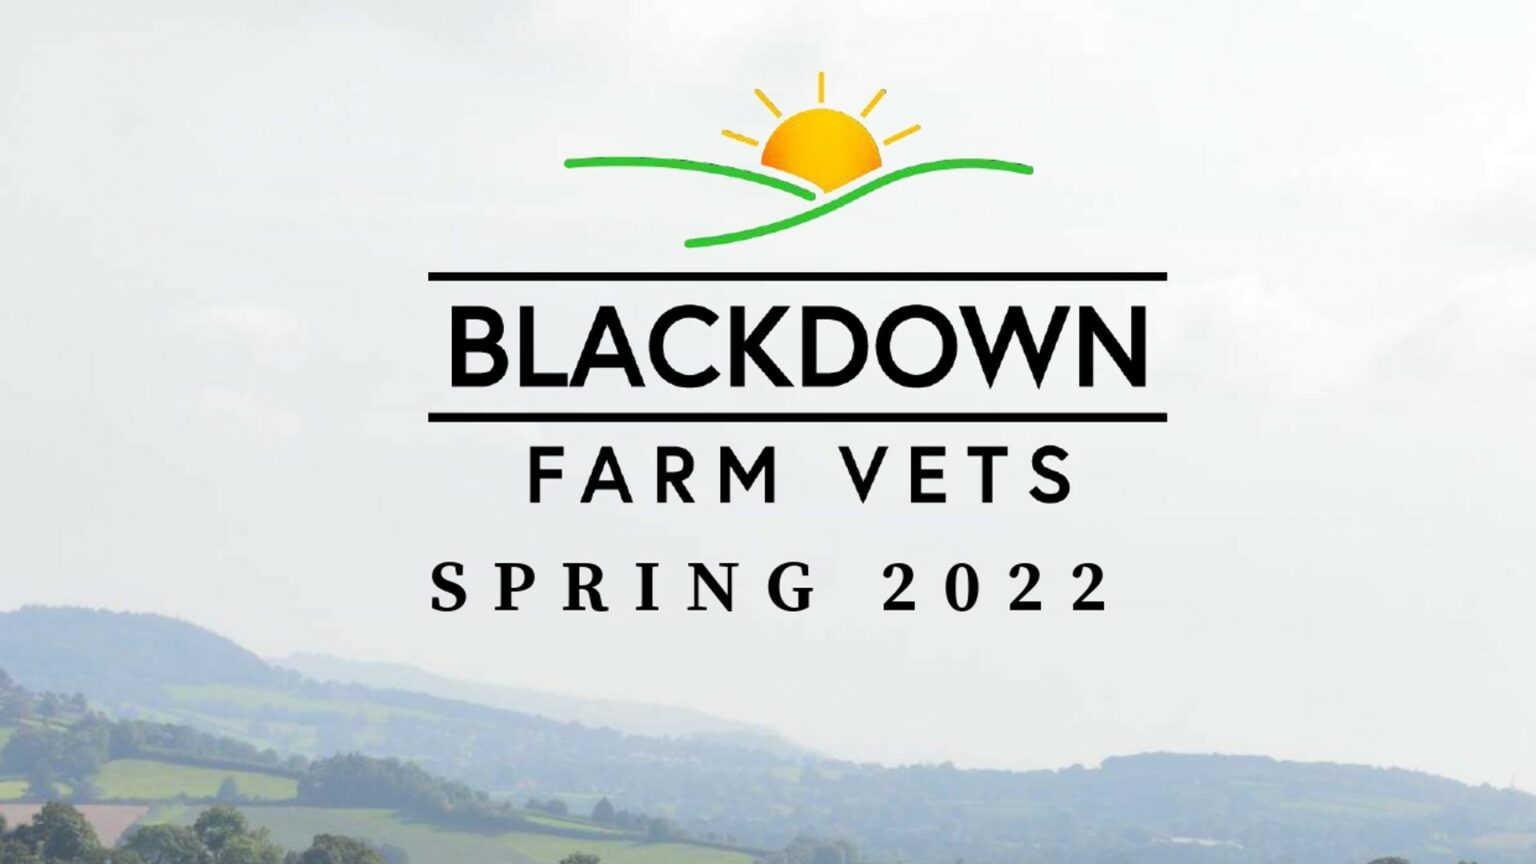 Welcome to the first Blackdown Farm Vets Newsletter! A big thank you for your support over the last 7 months. Click to read more...